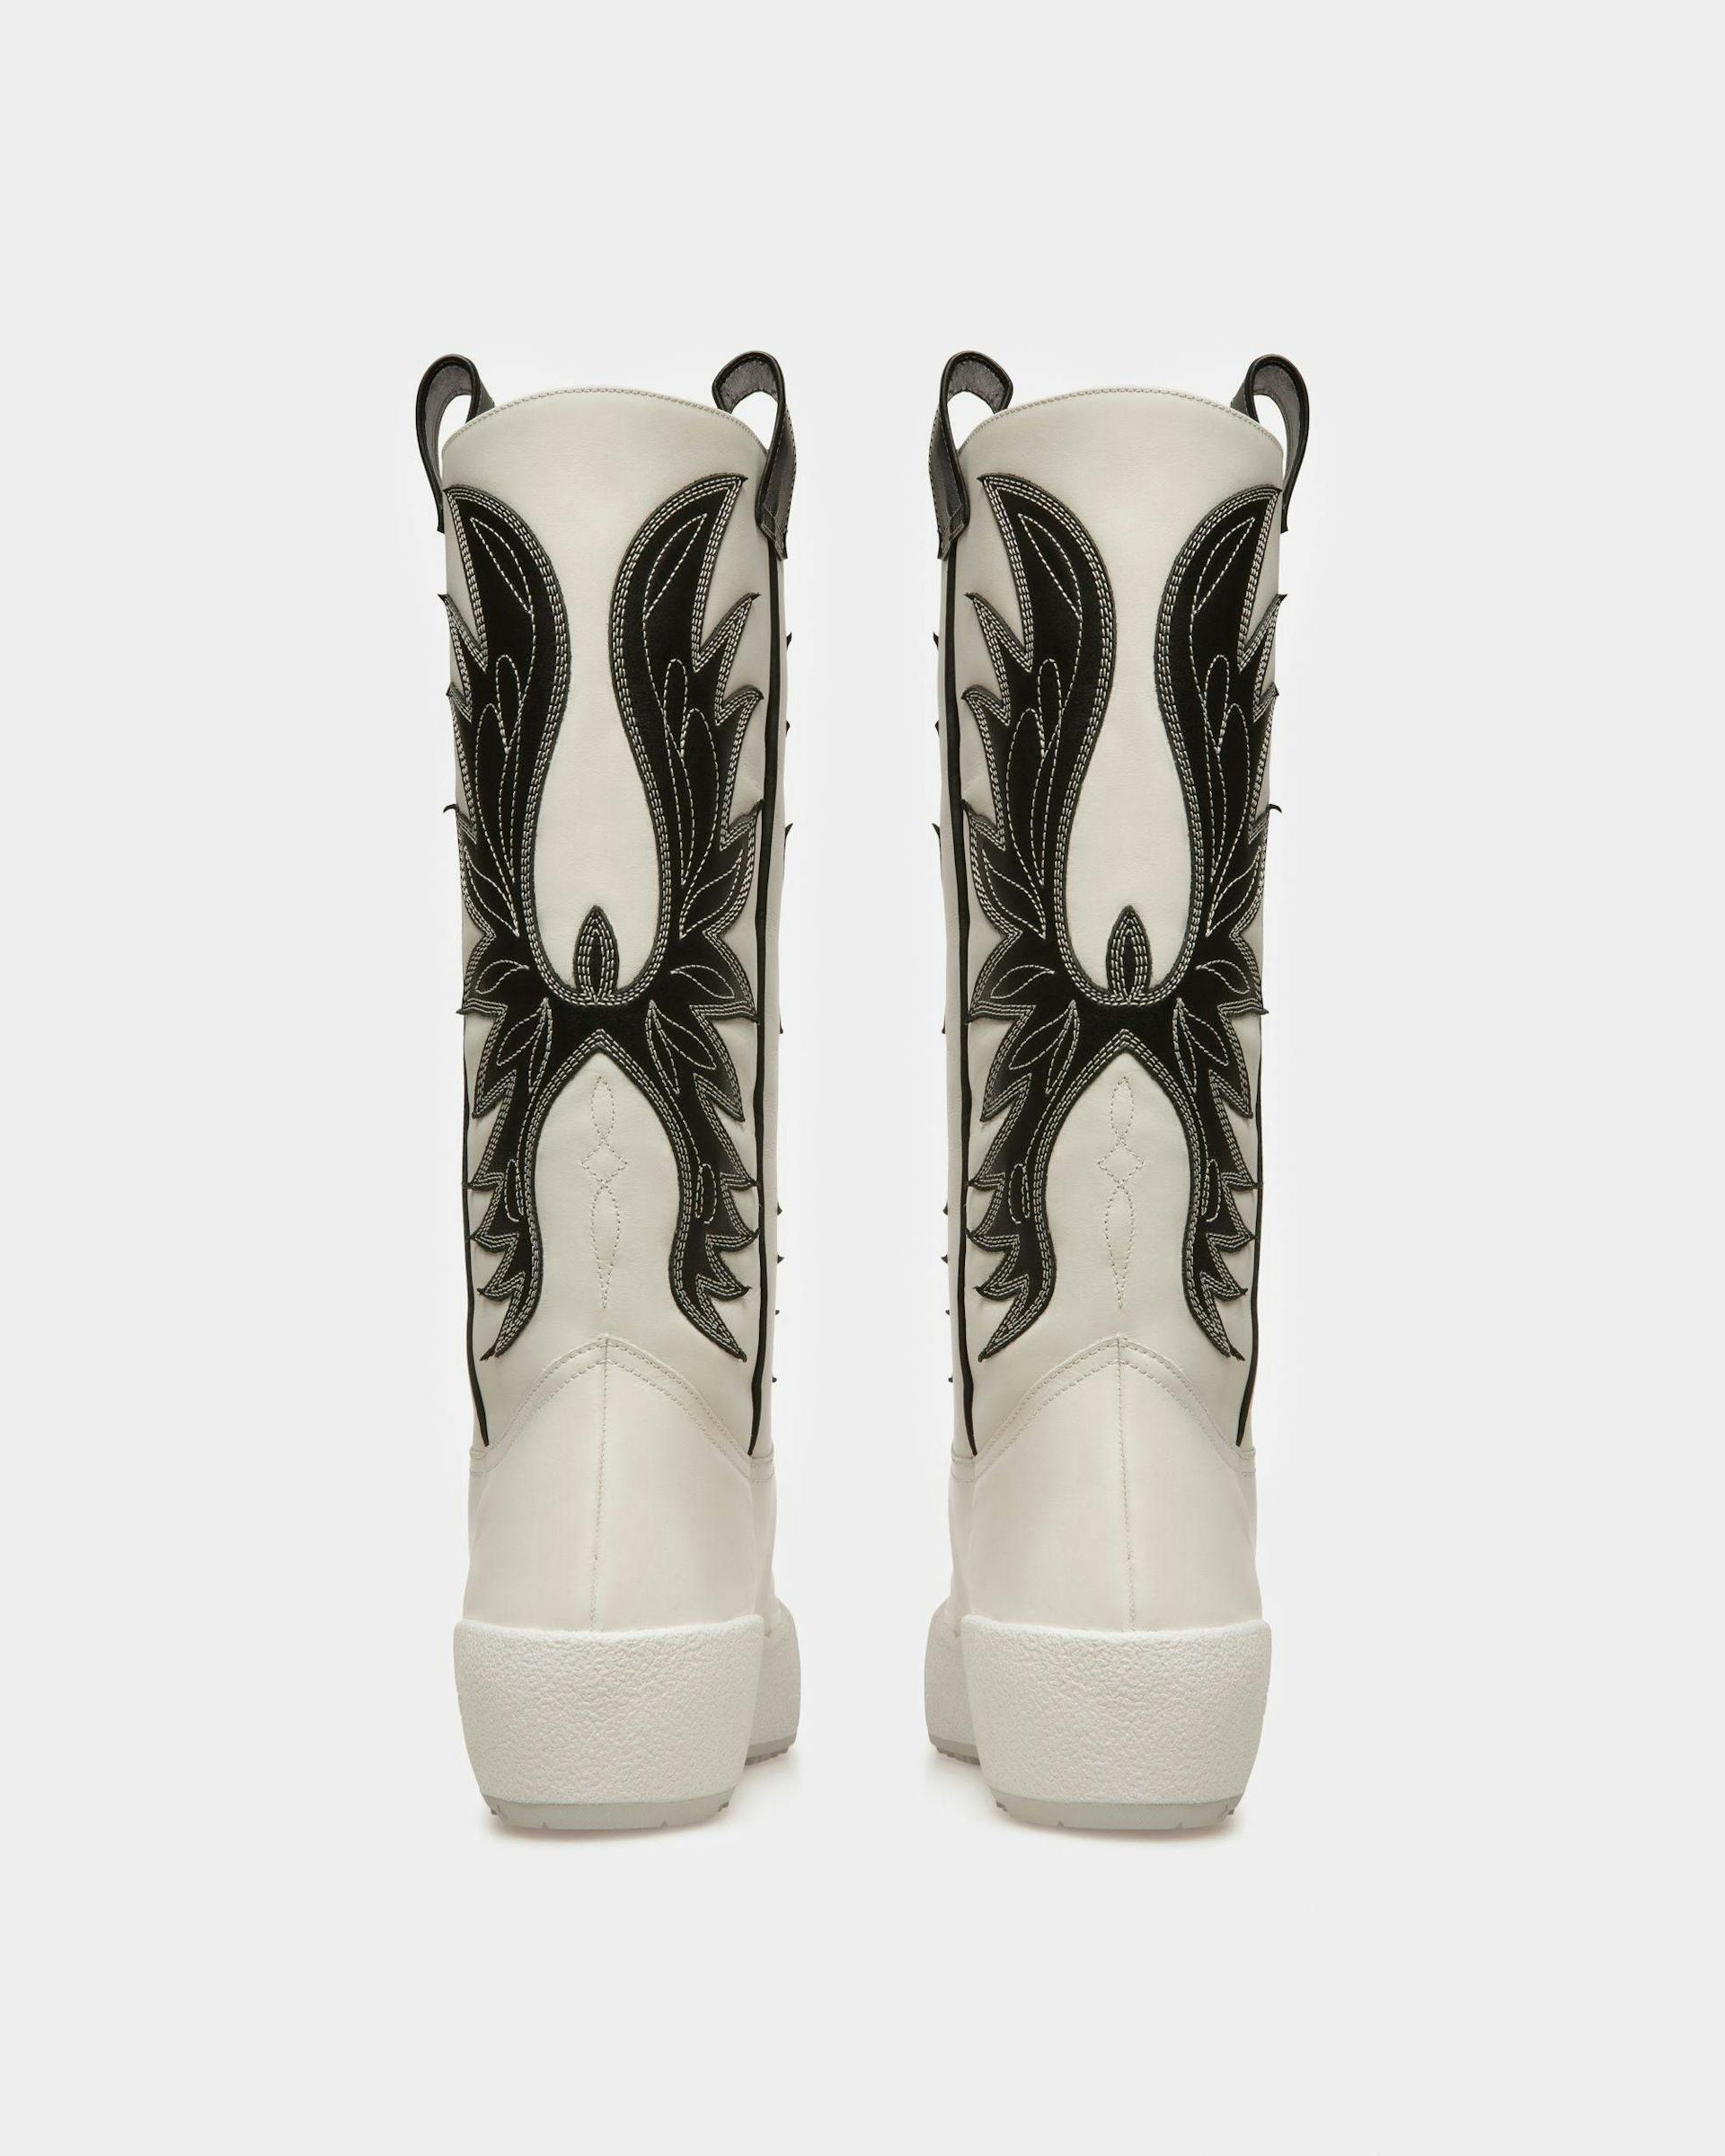 Chambery Leather Long Boots In White & Black - Women's - Bally - 04